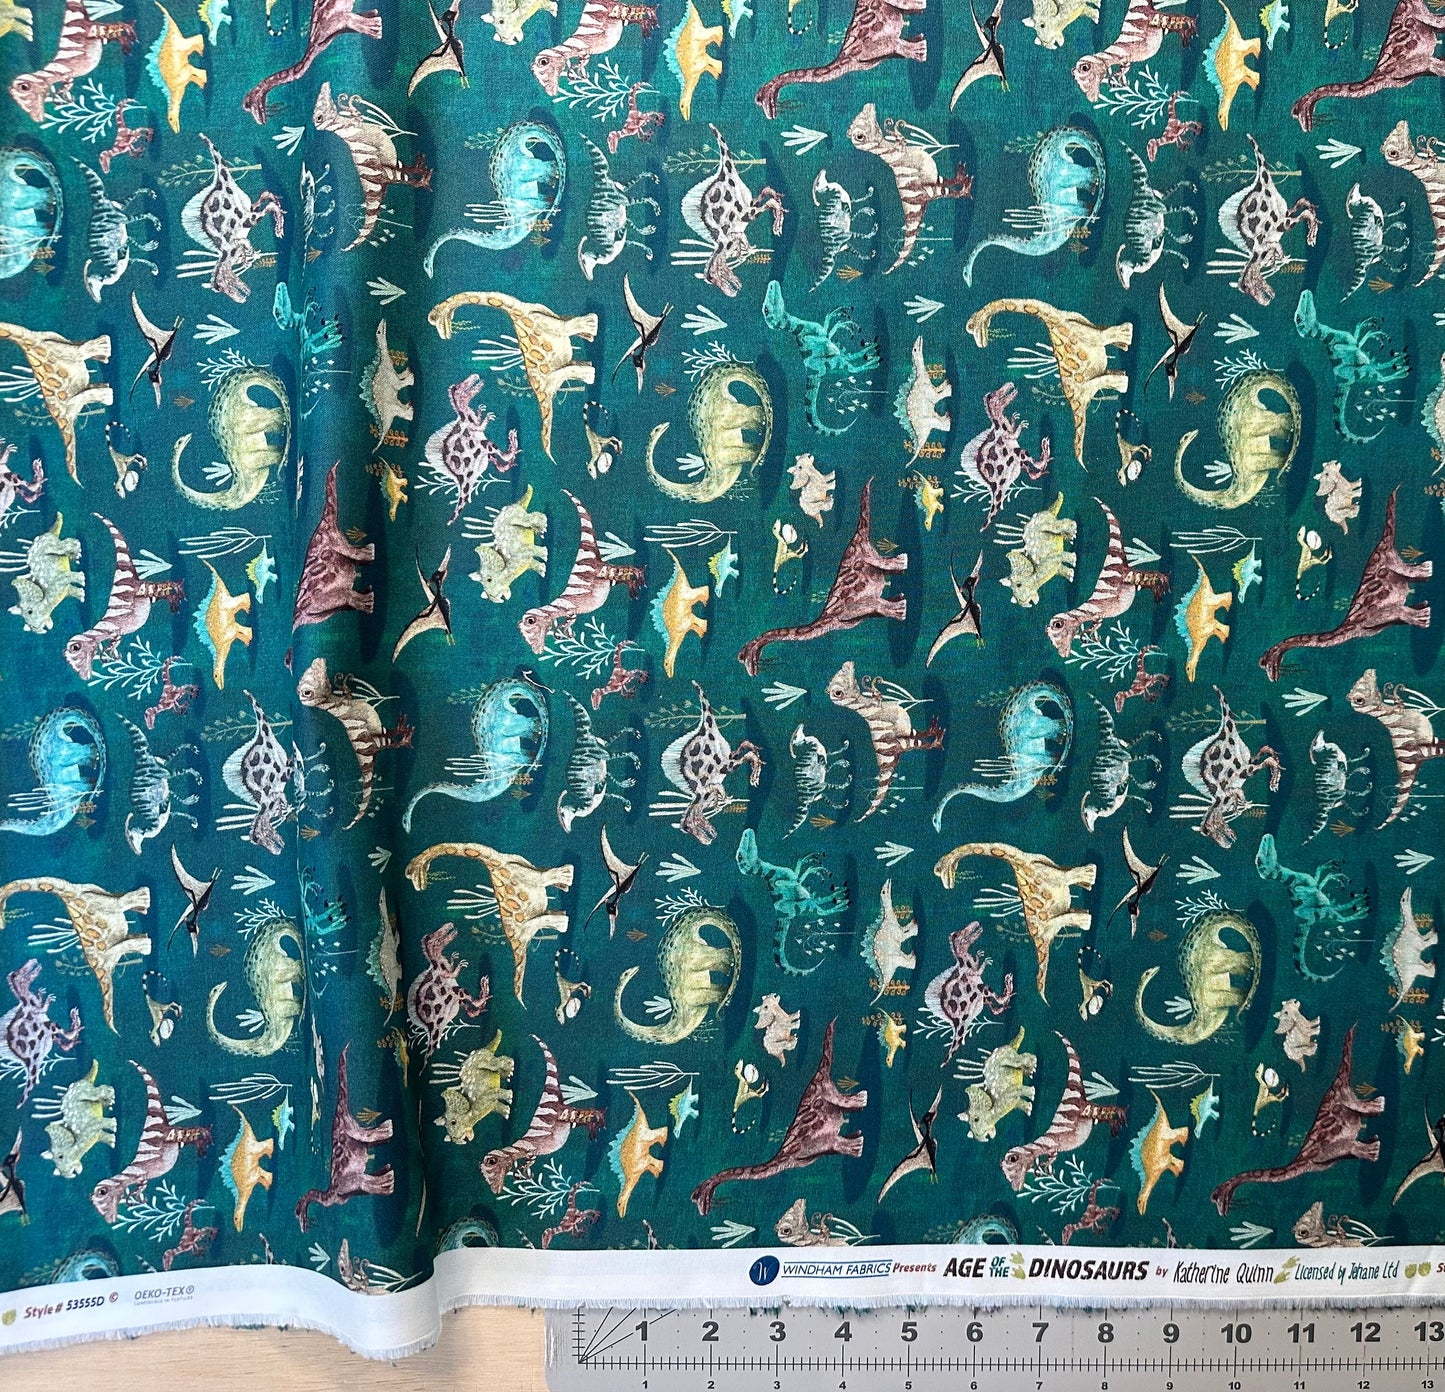 A Moment in Time, Teal, Age of the Dinosaurs, Windham Fabrics, Quilt Fabric, Cotton Fabric, Quilting, Dinosaur Fabric, Fabric By The Yard